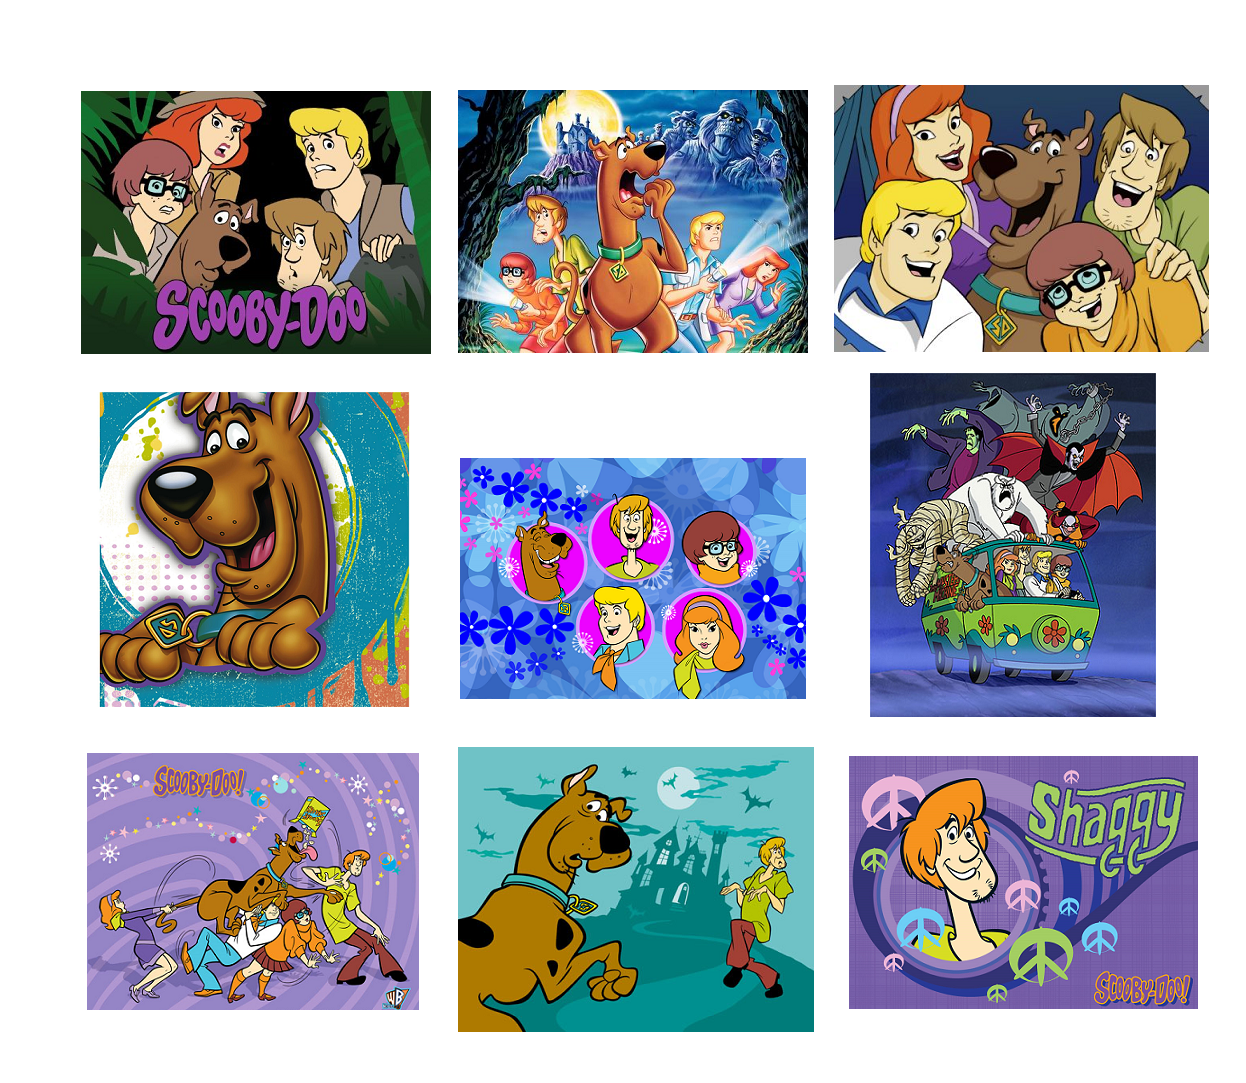 Scooby Doo Stickers, Birthday Party Favors, Labels, rewards, scoobydoo, crafts - $11.99